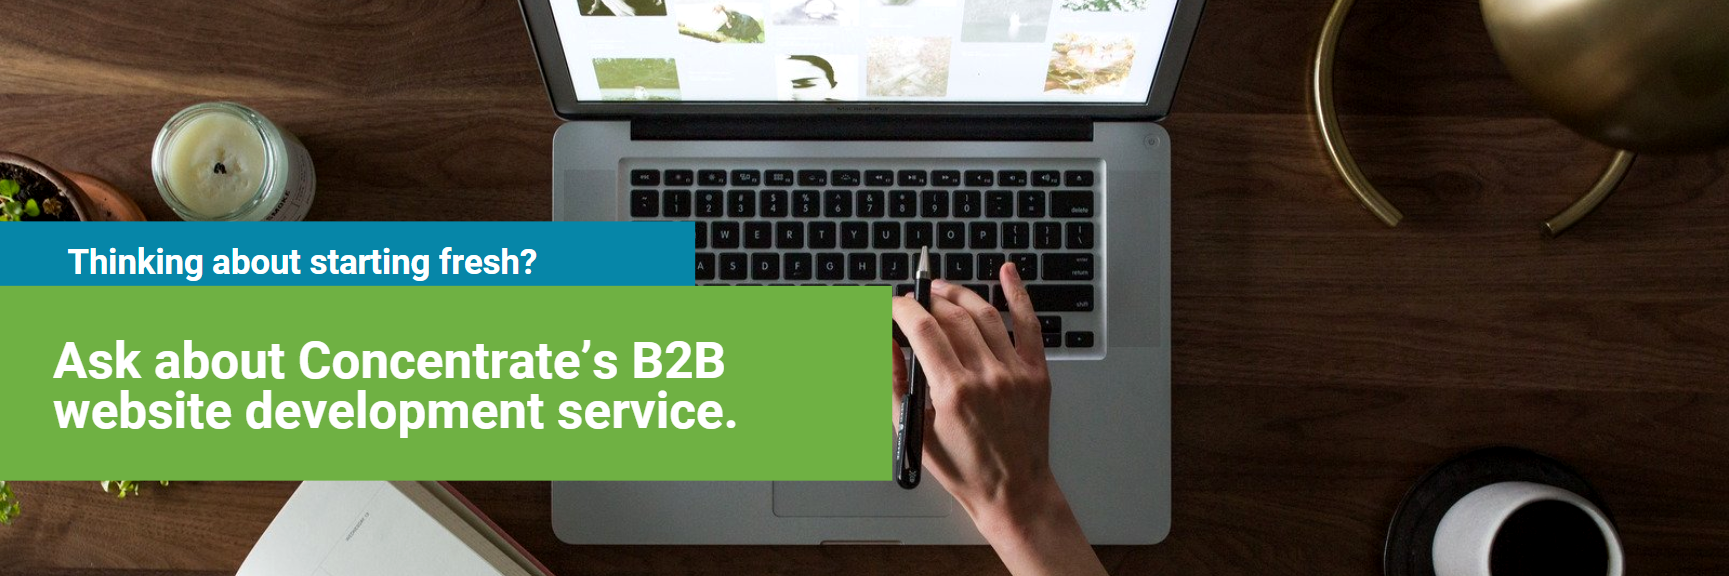 Ask about Concentrate's B2B website development service